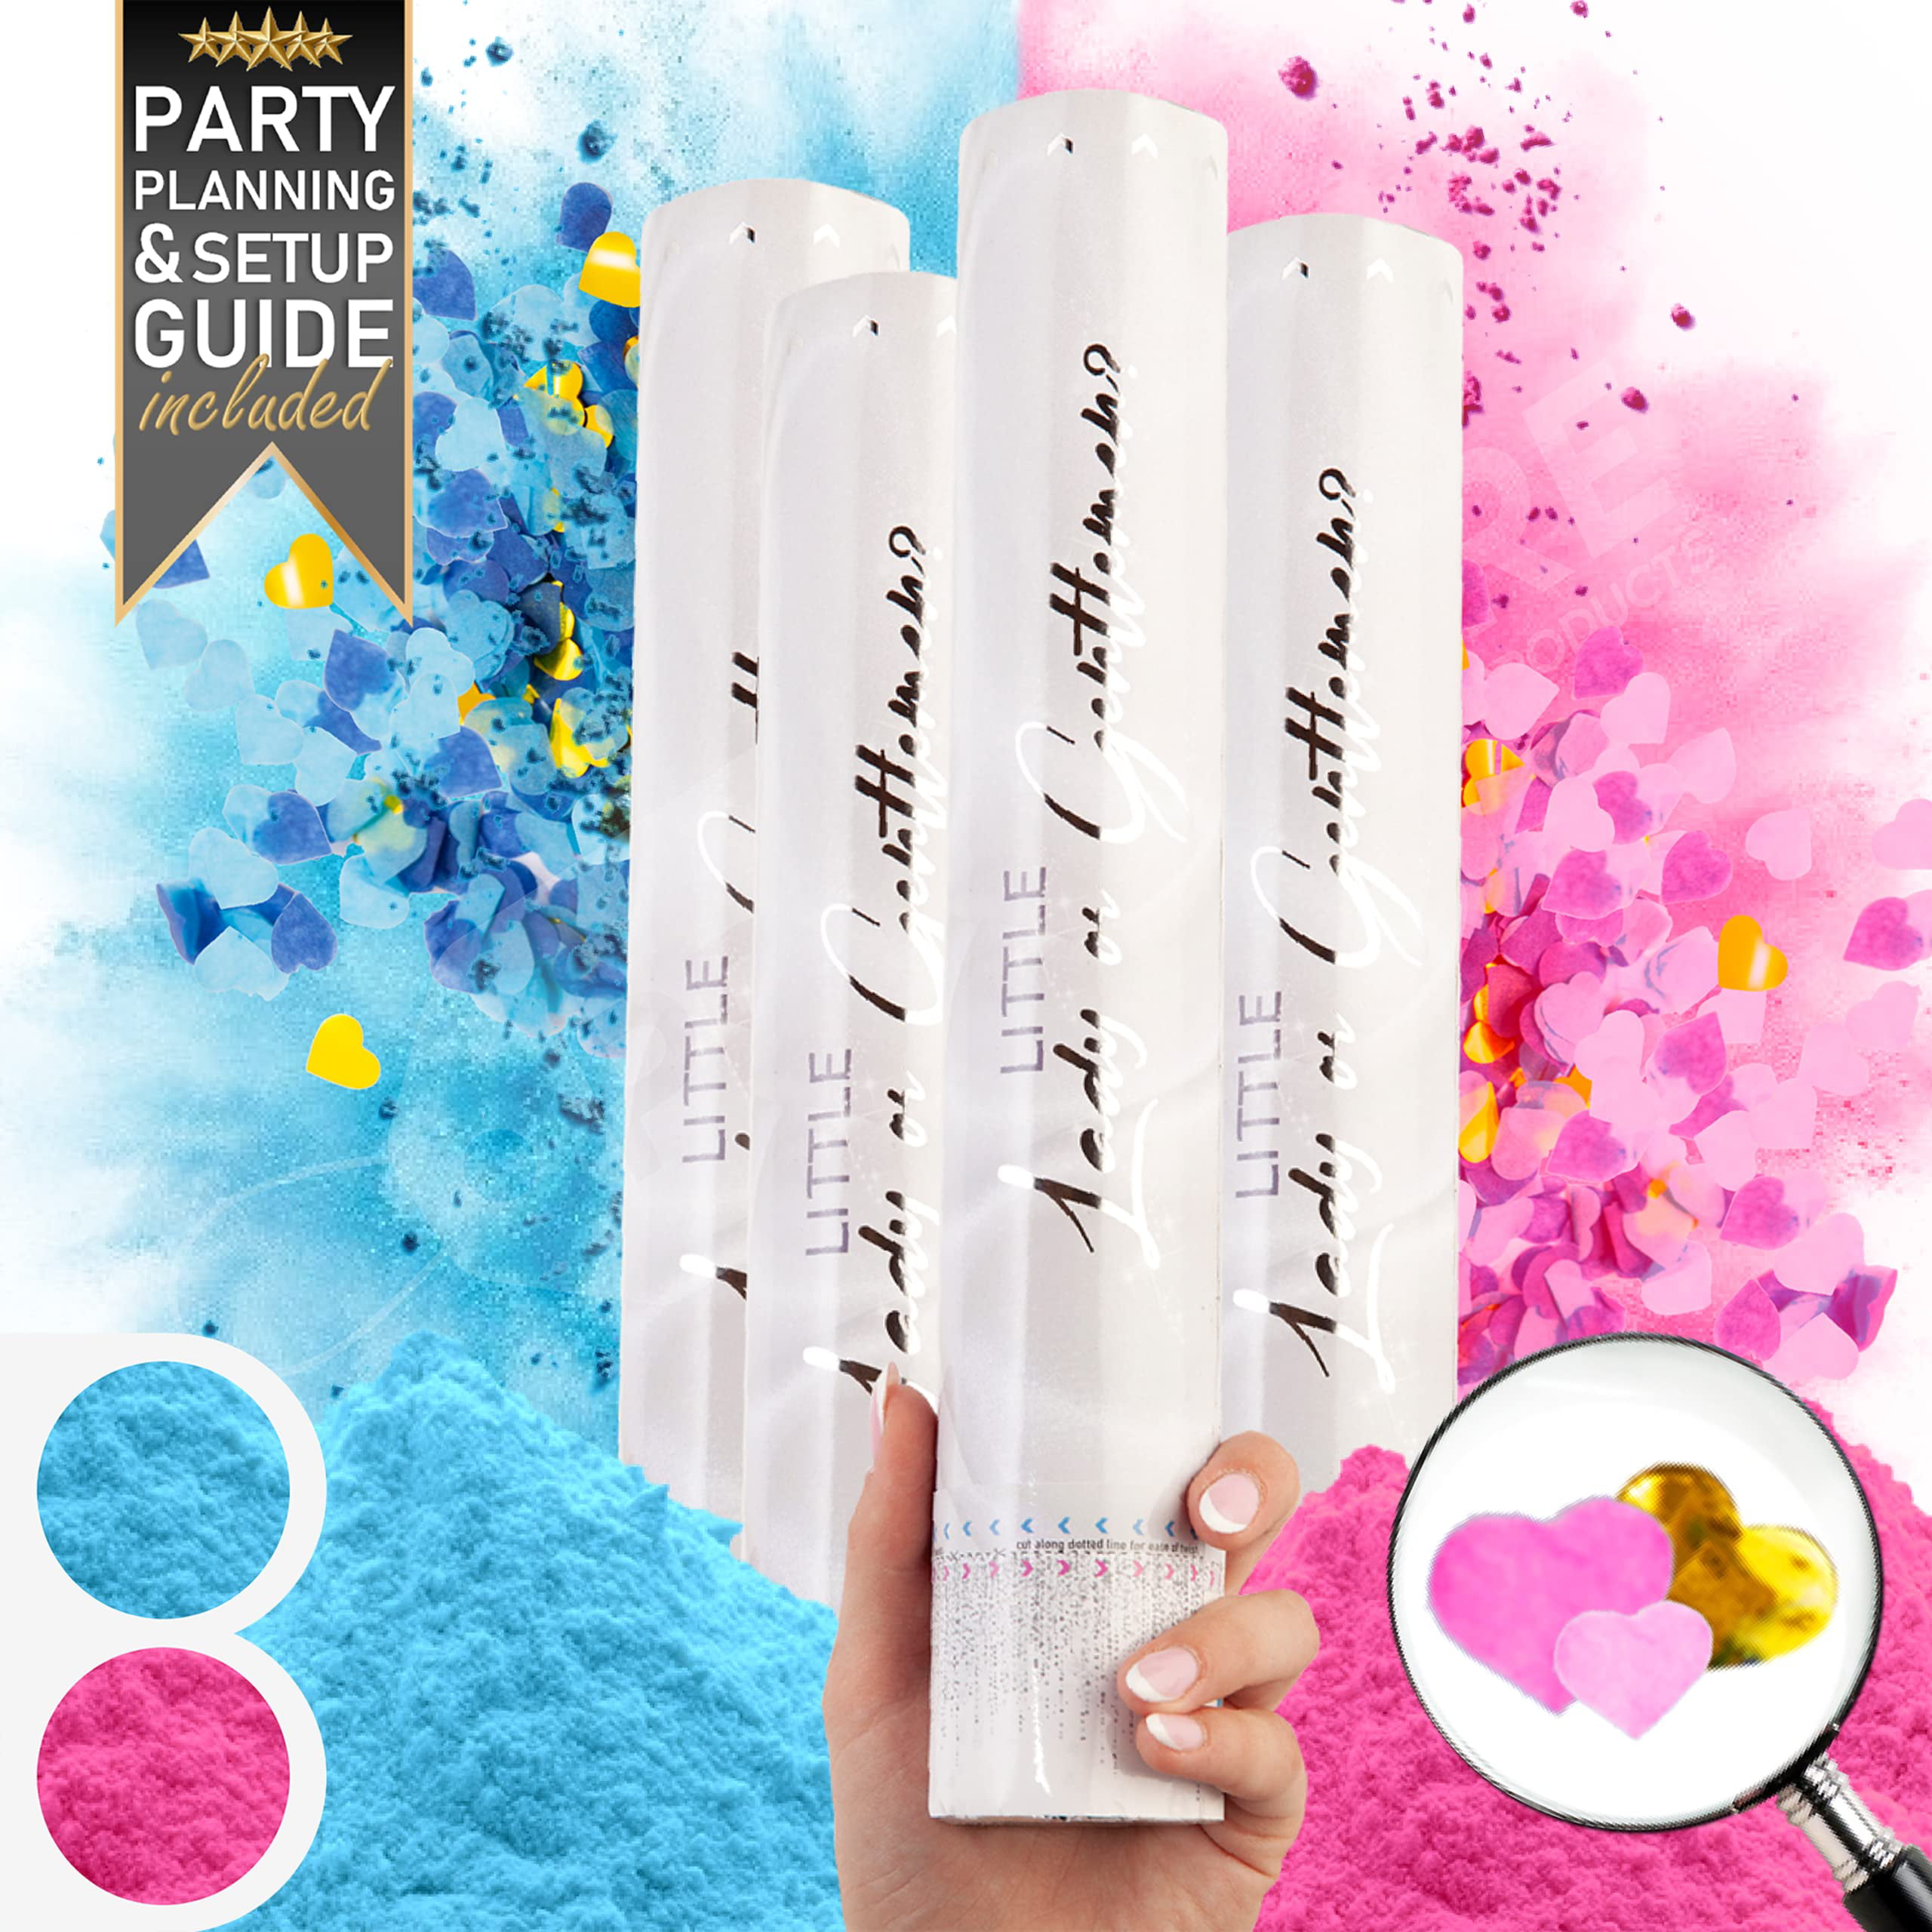 Set of 2 in Pink and Blue Gender Reveal Confetti and Color Powder Cannon for Boy or Girl Baby Shower and Reveal Party Premium Large 16 Inch Biodegradable Confetti Dispensers with Colorful Powder 